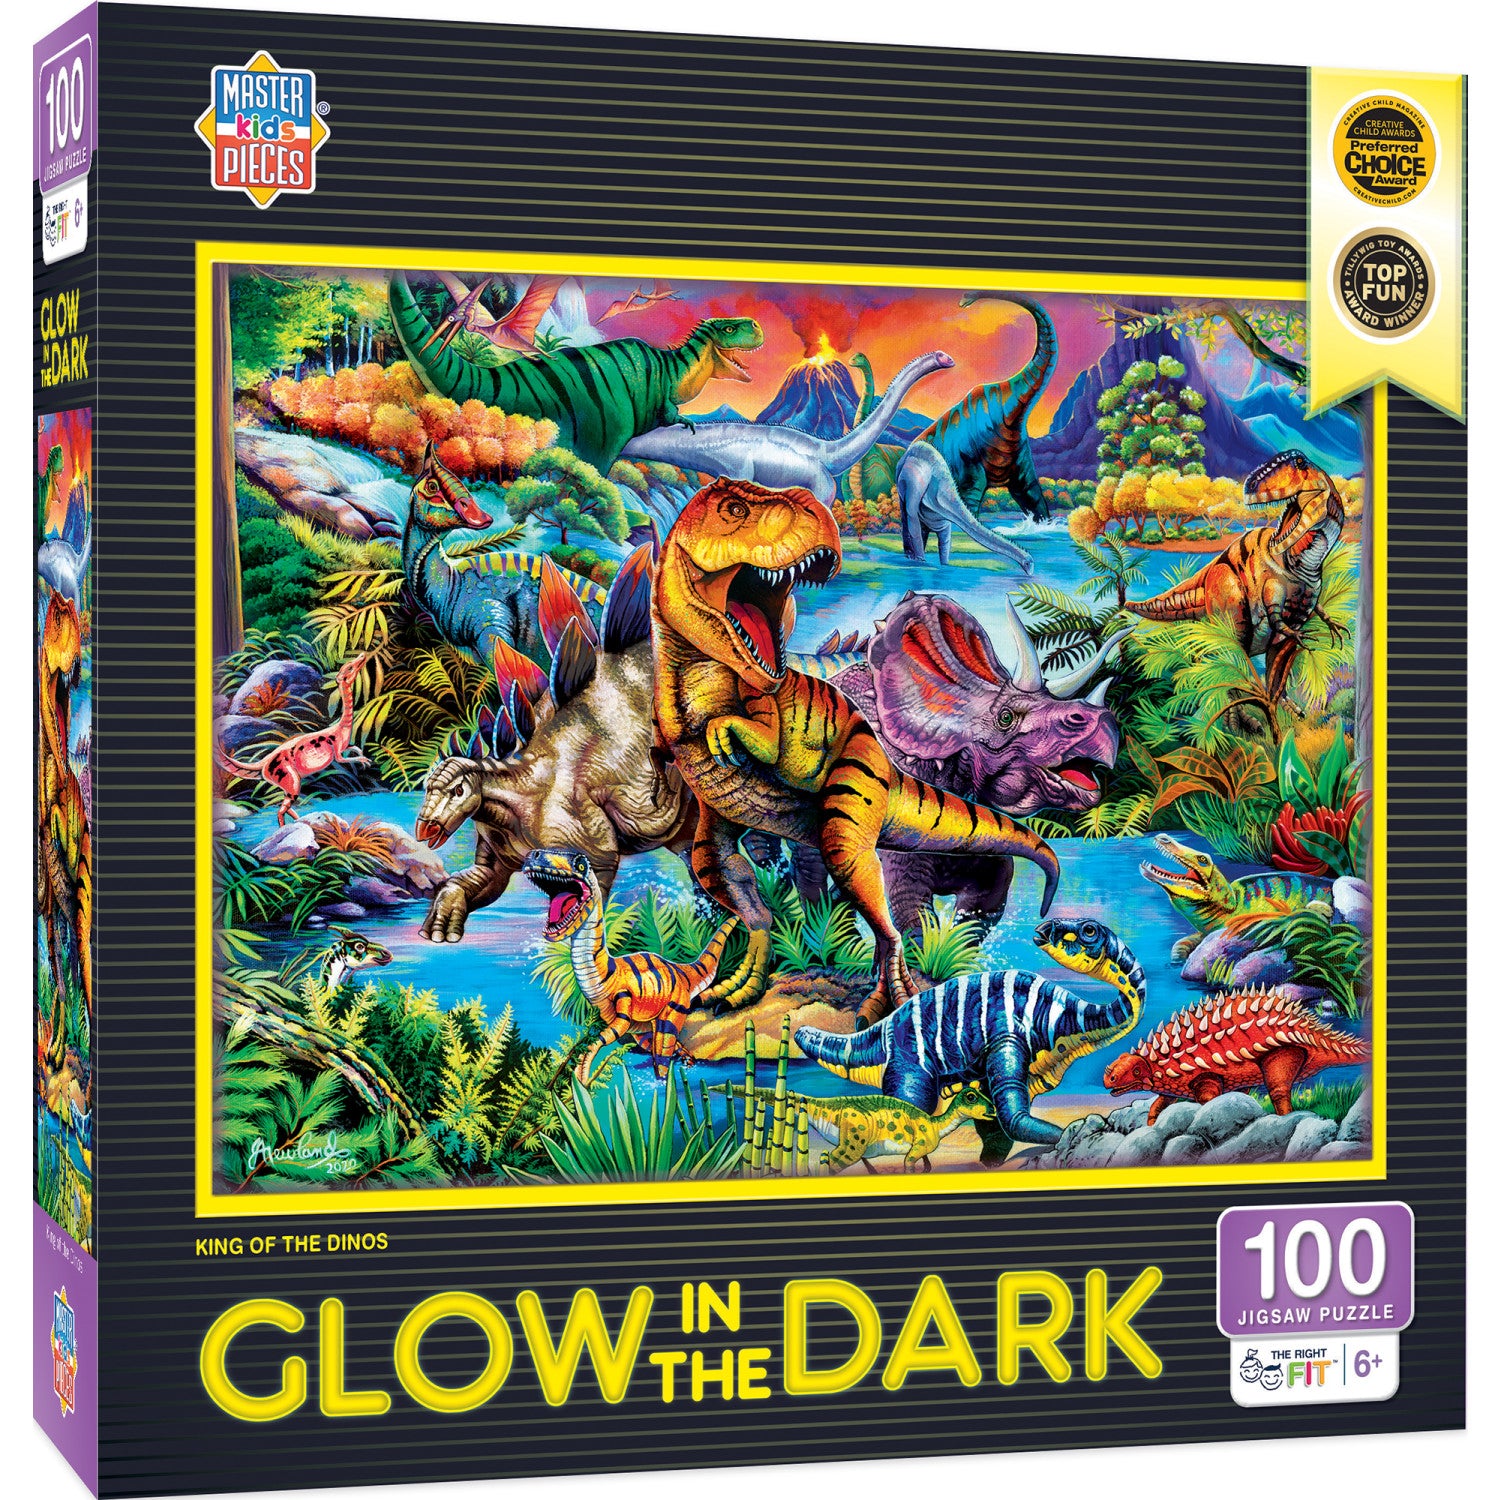 Glow in the Dark - King of the Dinos 100 Piece Jigsaw Puzzle